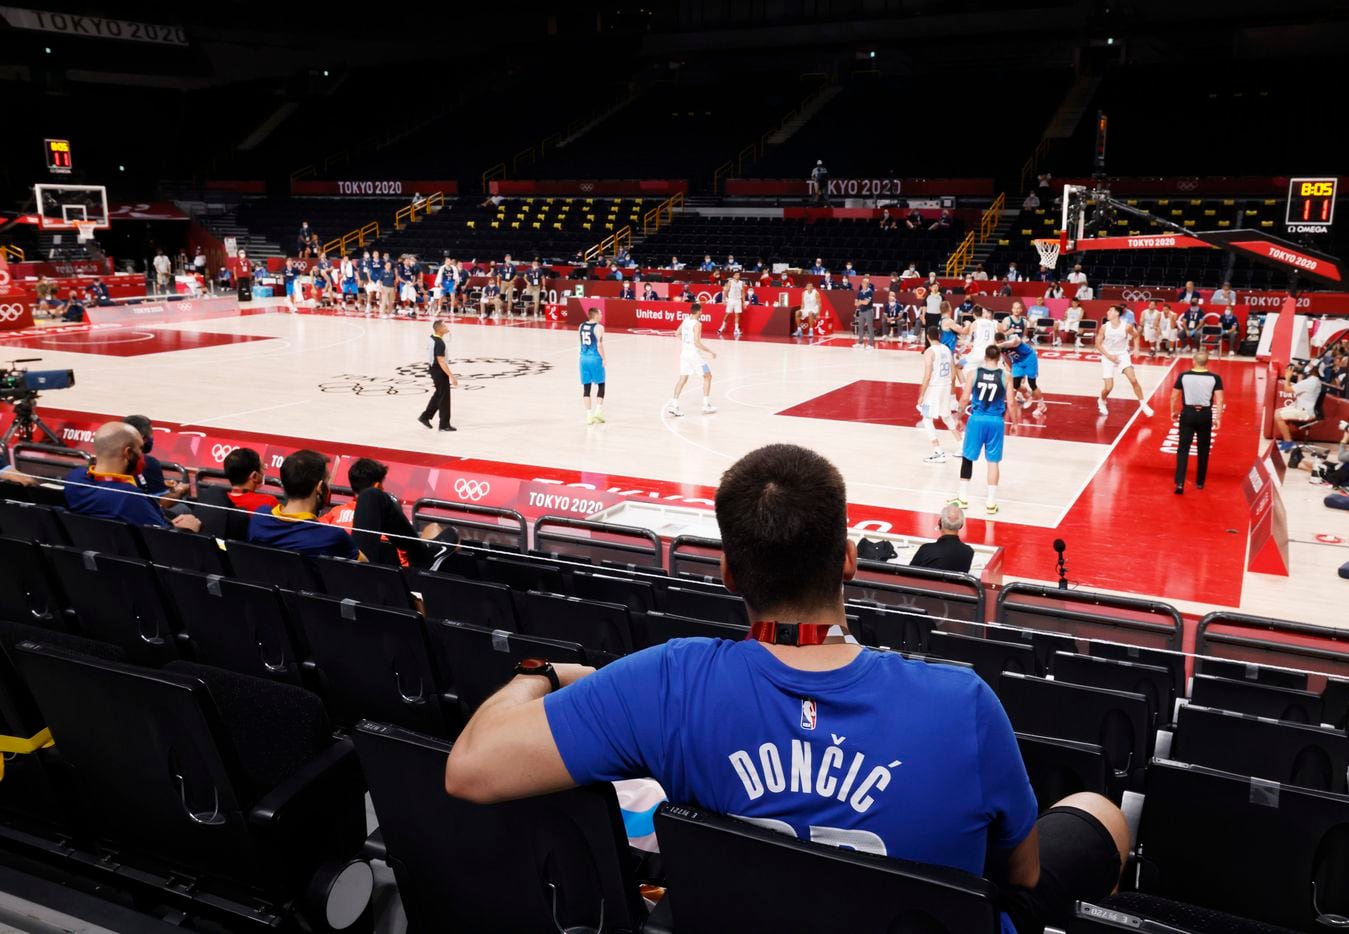 Luka Doncic fan Kristof Korsos of Hungary watches Slovenia play Argentina in the second half during the postponed 2020 Tokyo Olympics at Saitama Super Arena on Monday, July 26, 2021, in Saitama, Japan. Slovenia defeated Argentina 118-100. (Vernon Bryant/The Dallas Morning News)